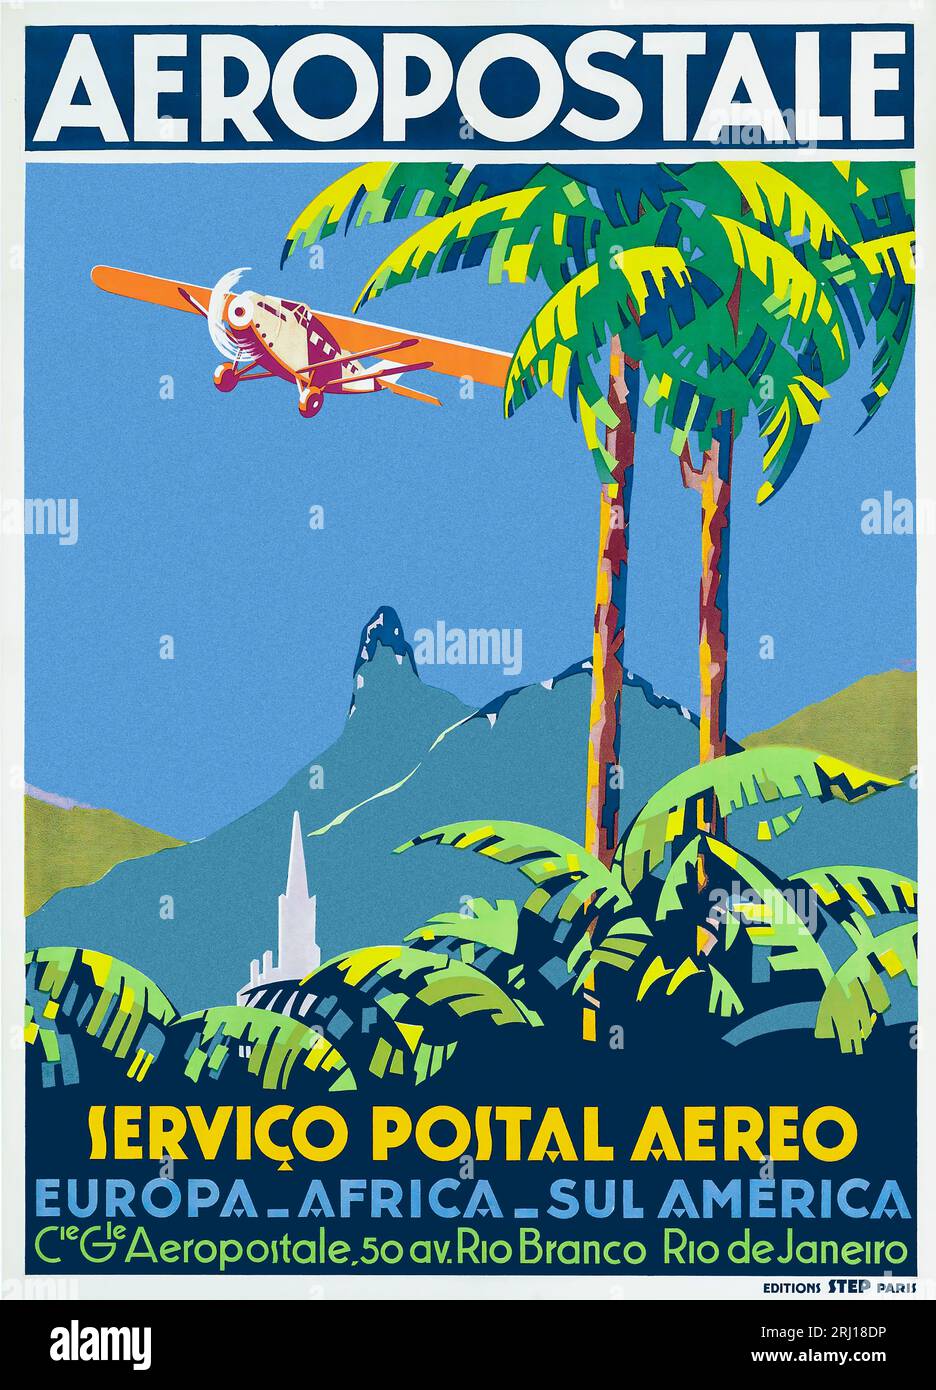 Vintage Aeropostale Air Mail postal service poster fro Europe, Africa and South America Stock Photo